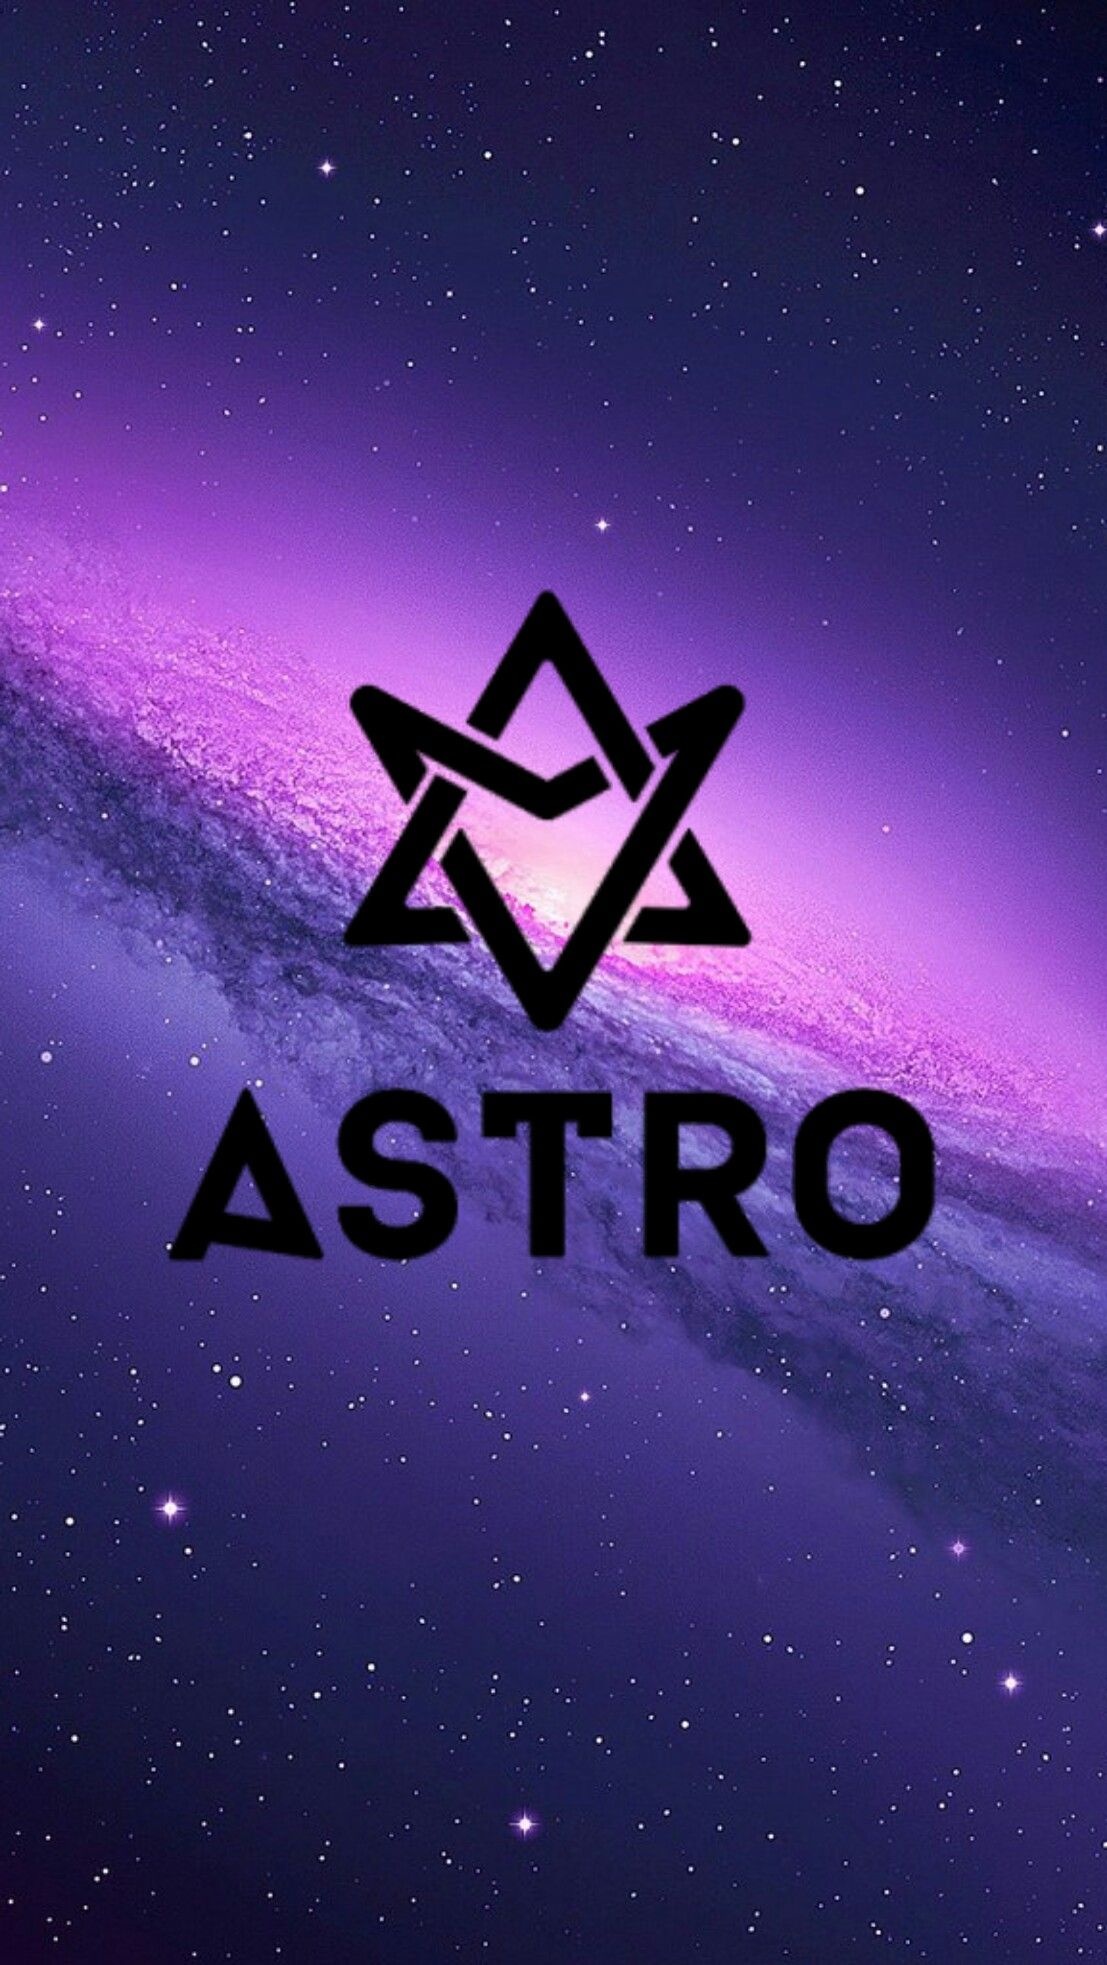 Astro, Kpop band, HD wallpapers, Astro kpop, 1110x1970 HD Phone